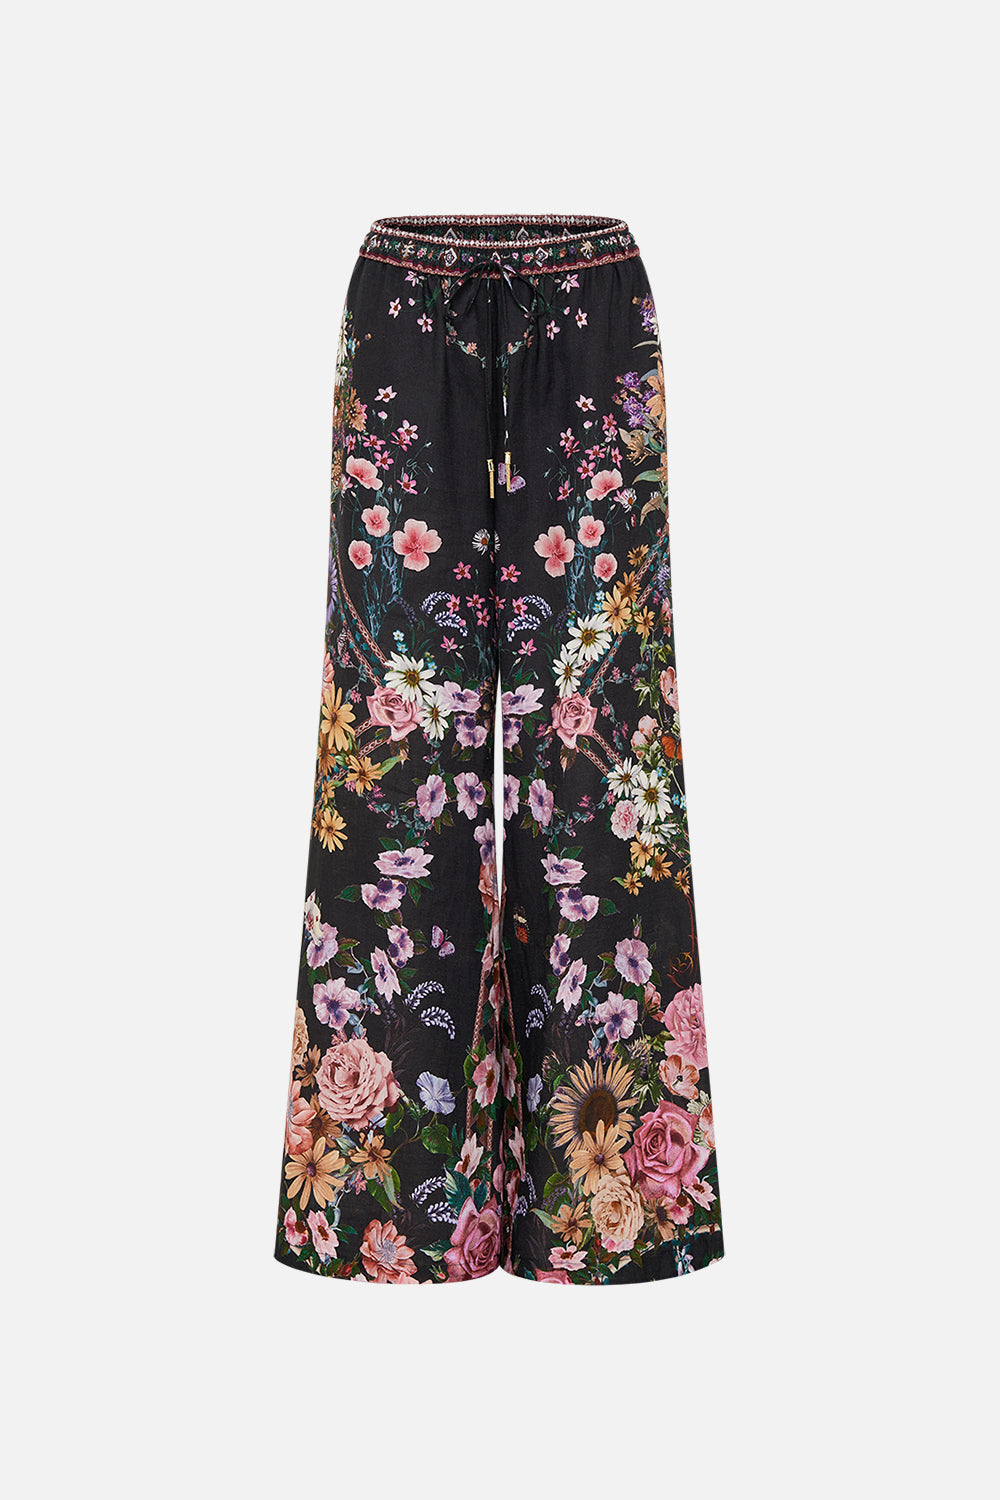 CAMILLA linen lounge pant in Letters From A Vineyard print 